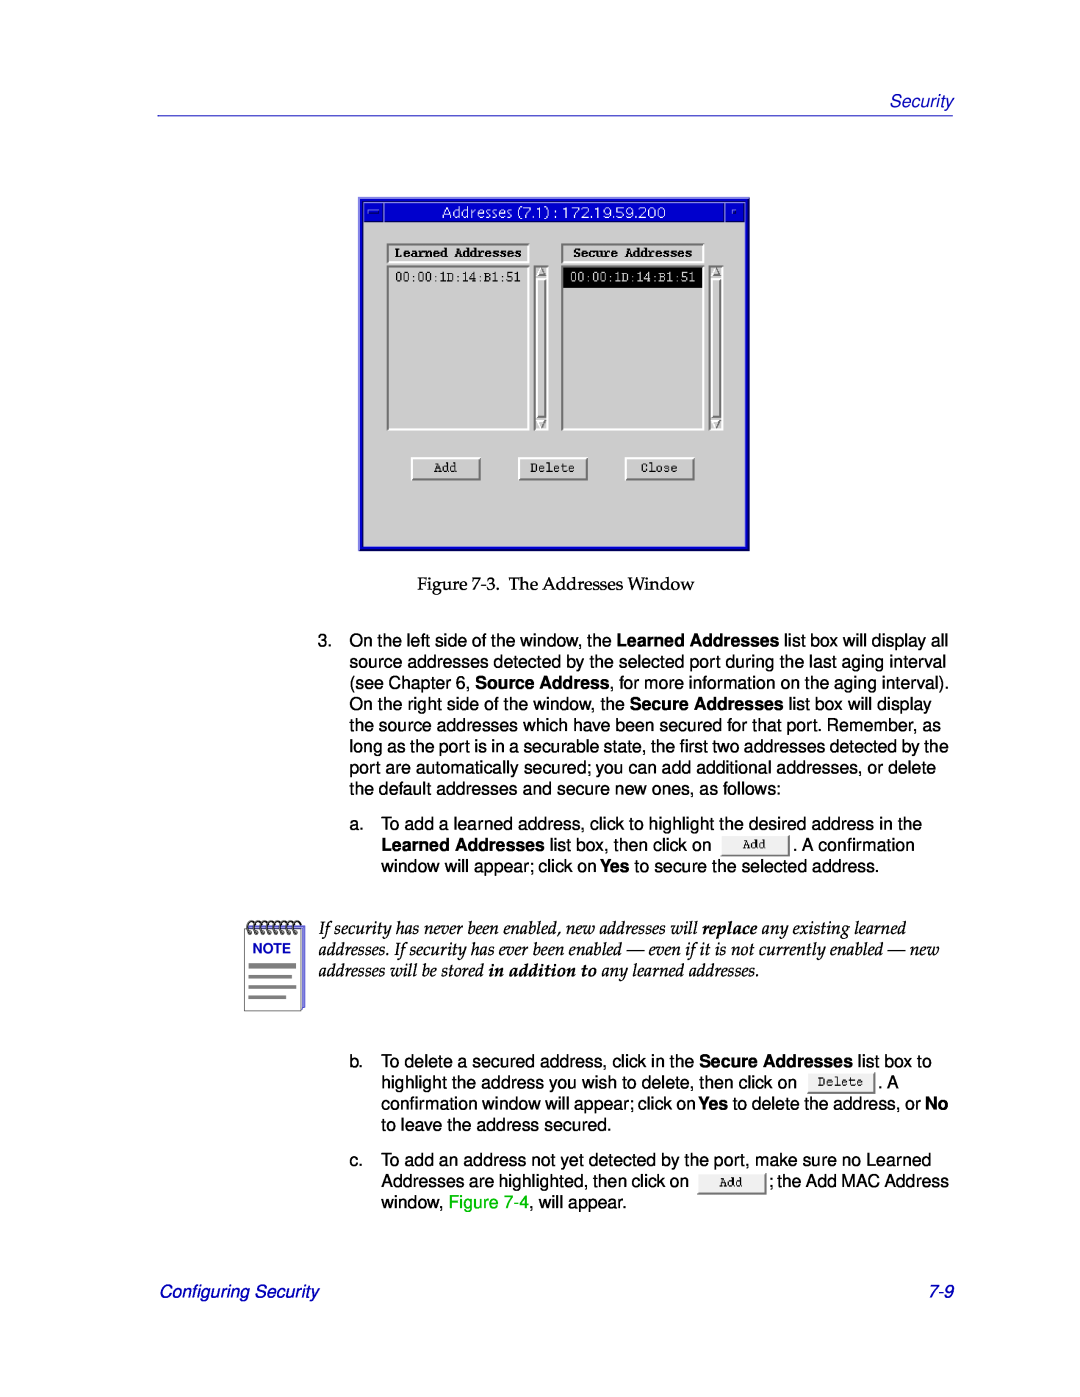 Cabletron Systems EMM-E6 manual 3. The Addresses Window, Conﬁguring Security 